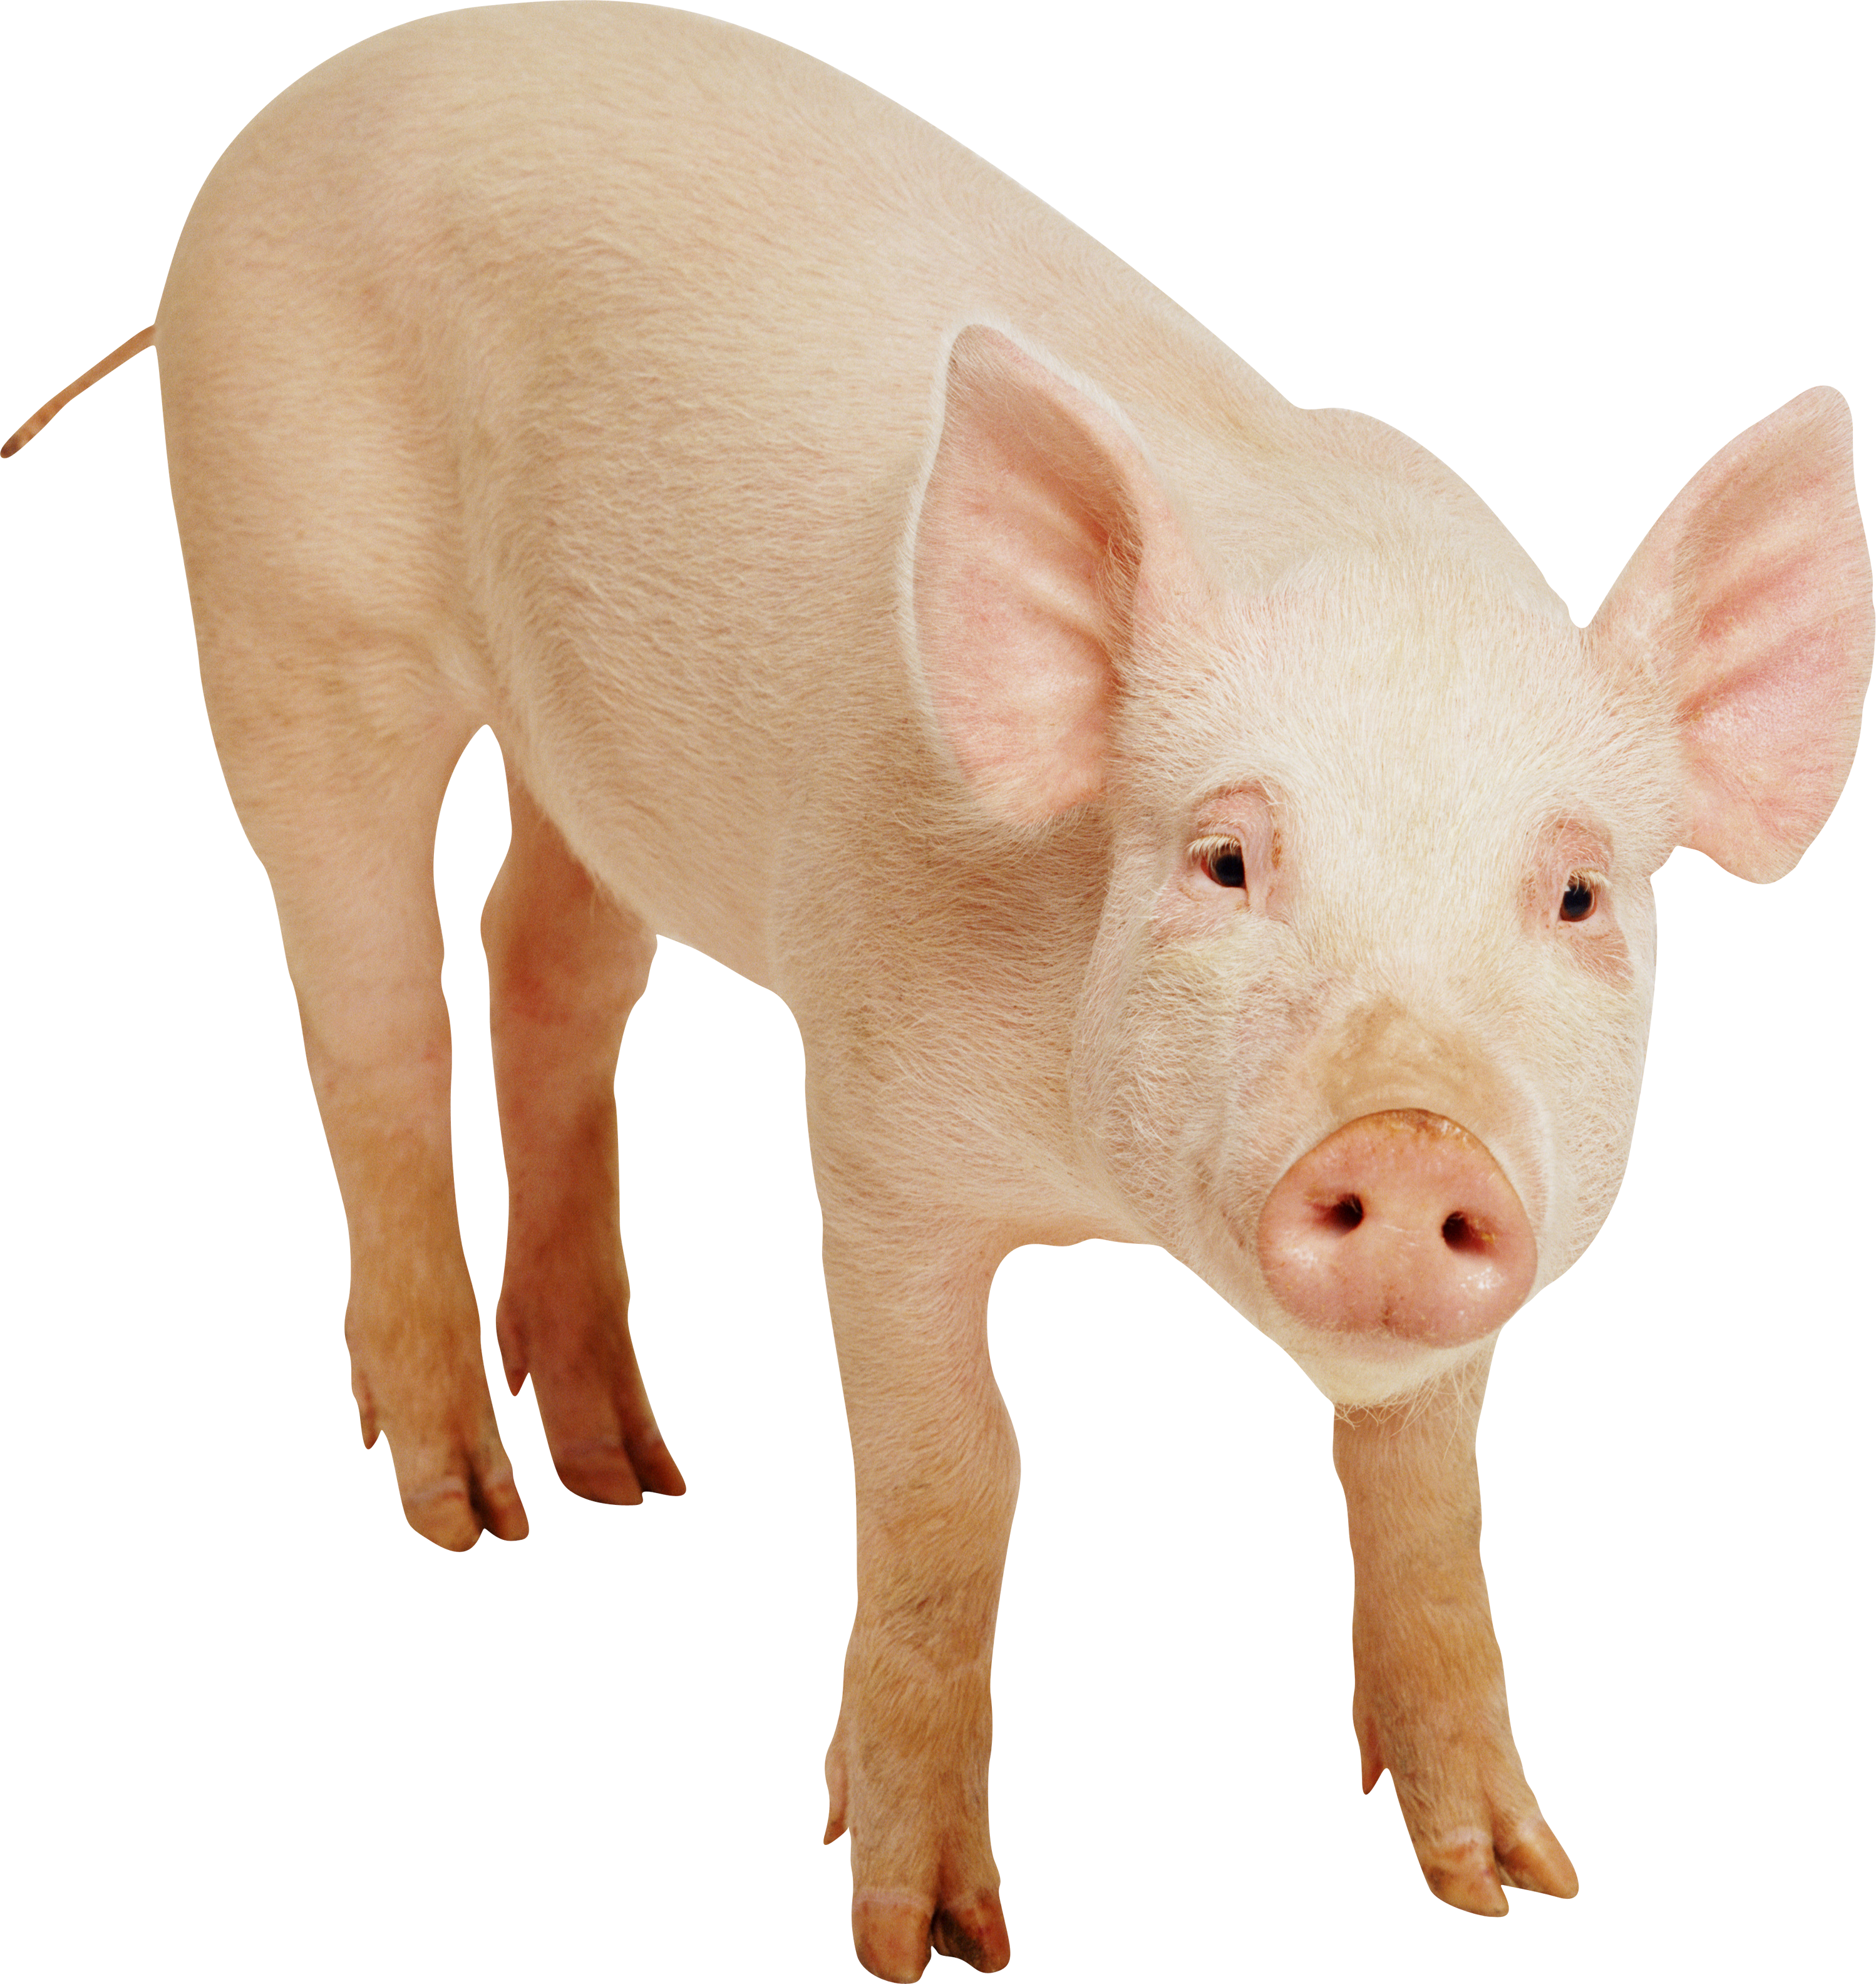 Pig frontview PNG Image